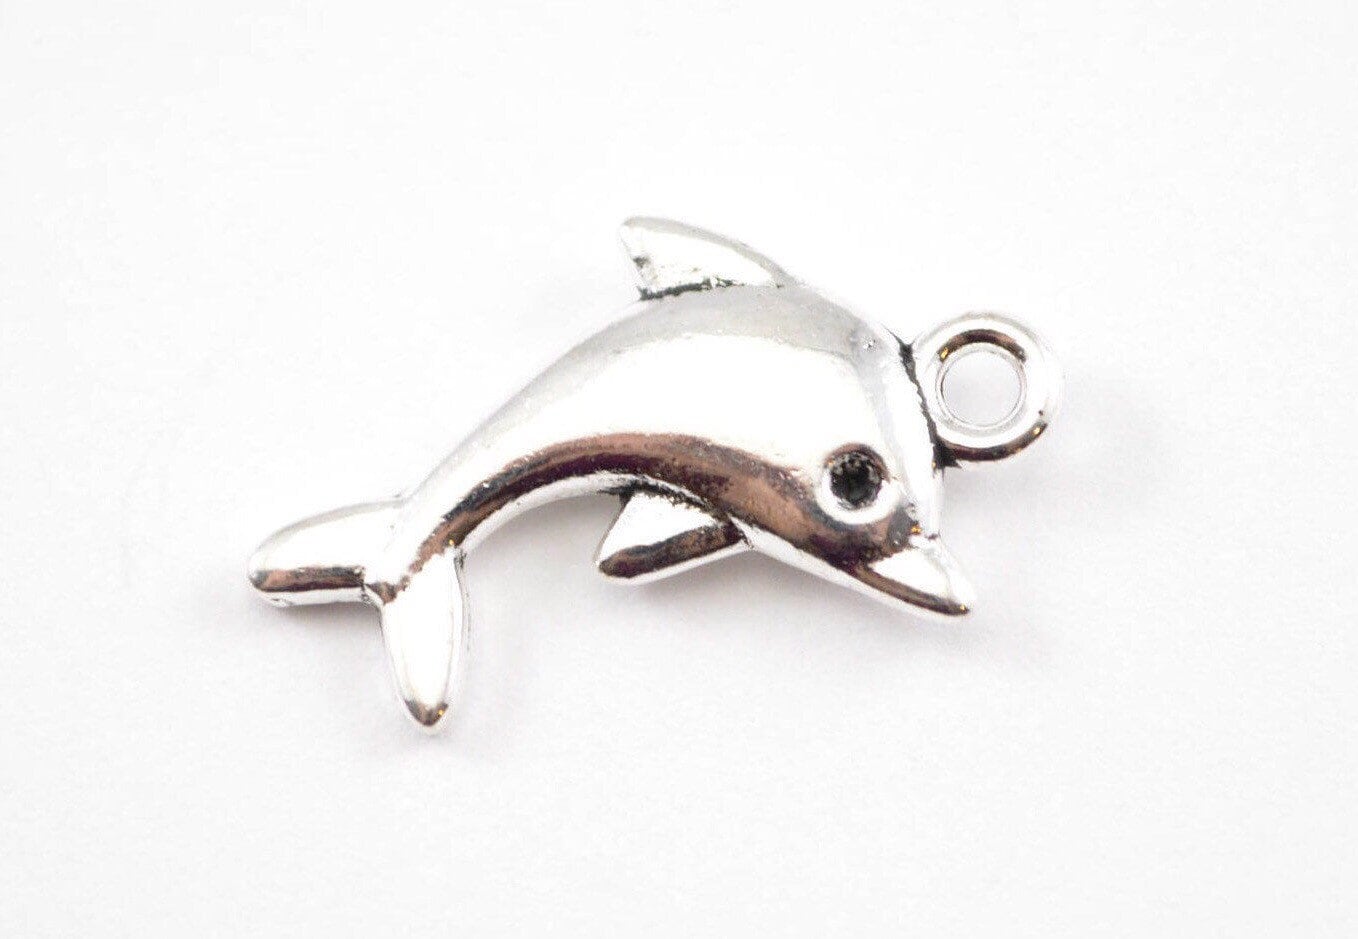 23mm Silver Yellow Plated Dolphin Charm